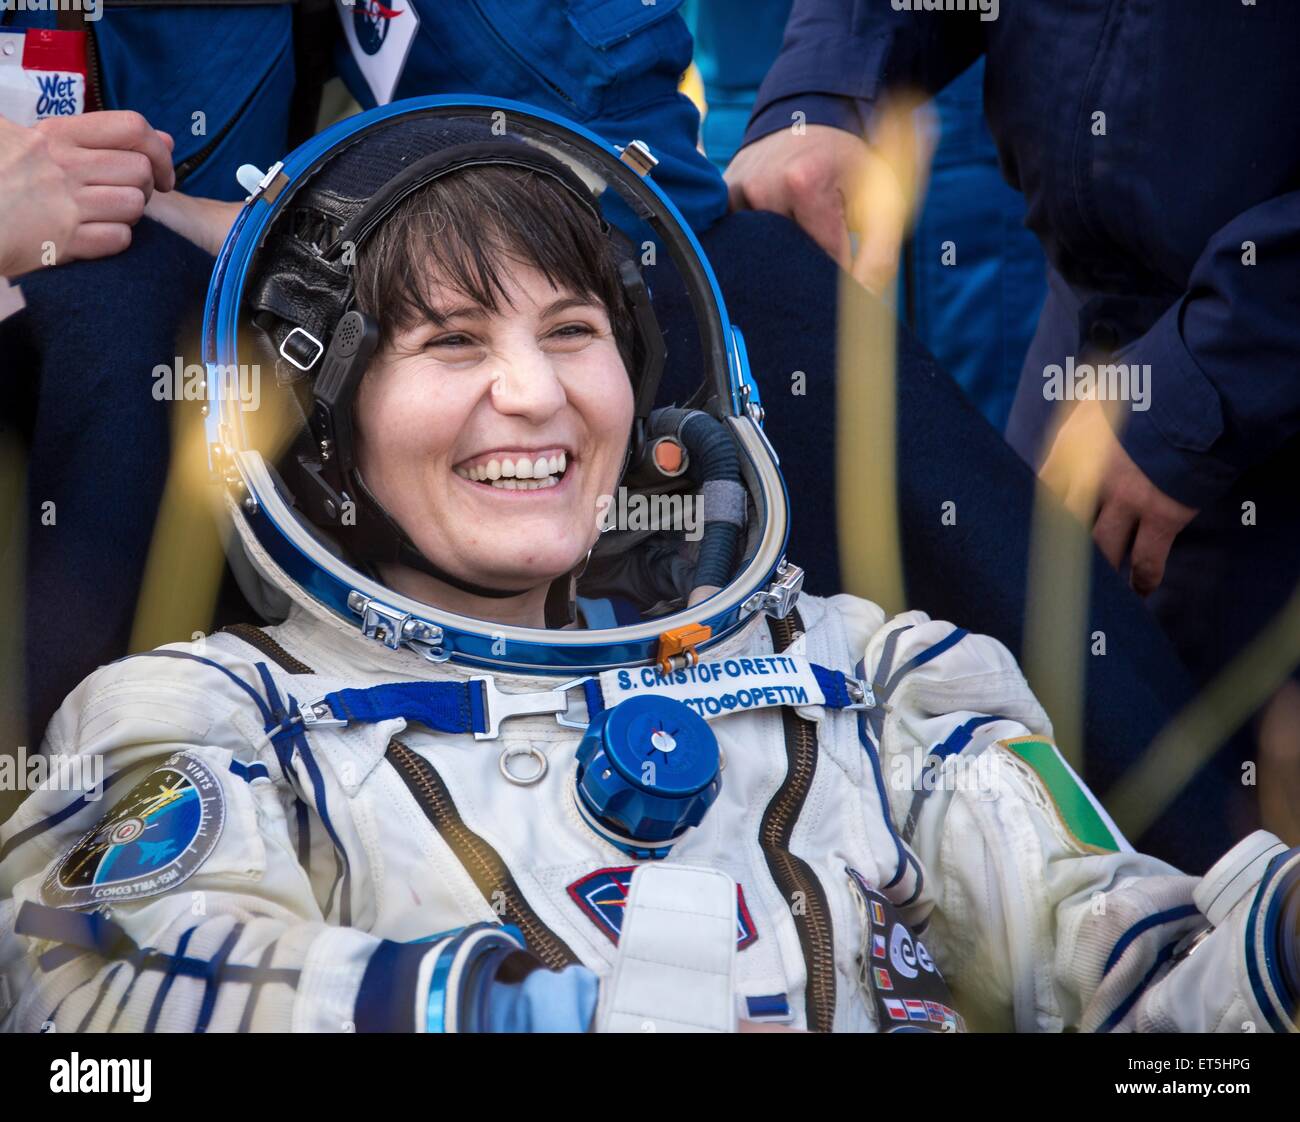 International Space Station Expedition 43 crew member Italian astronaut Samantha Cristoforetti from European Space Agency smiles moments after landing in a remote area June 11, 2015 near Zhezkazgan, Kazakhstan. The crew is returning after more than six months onboard the International Space Station. Stock Photo